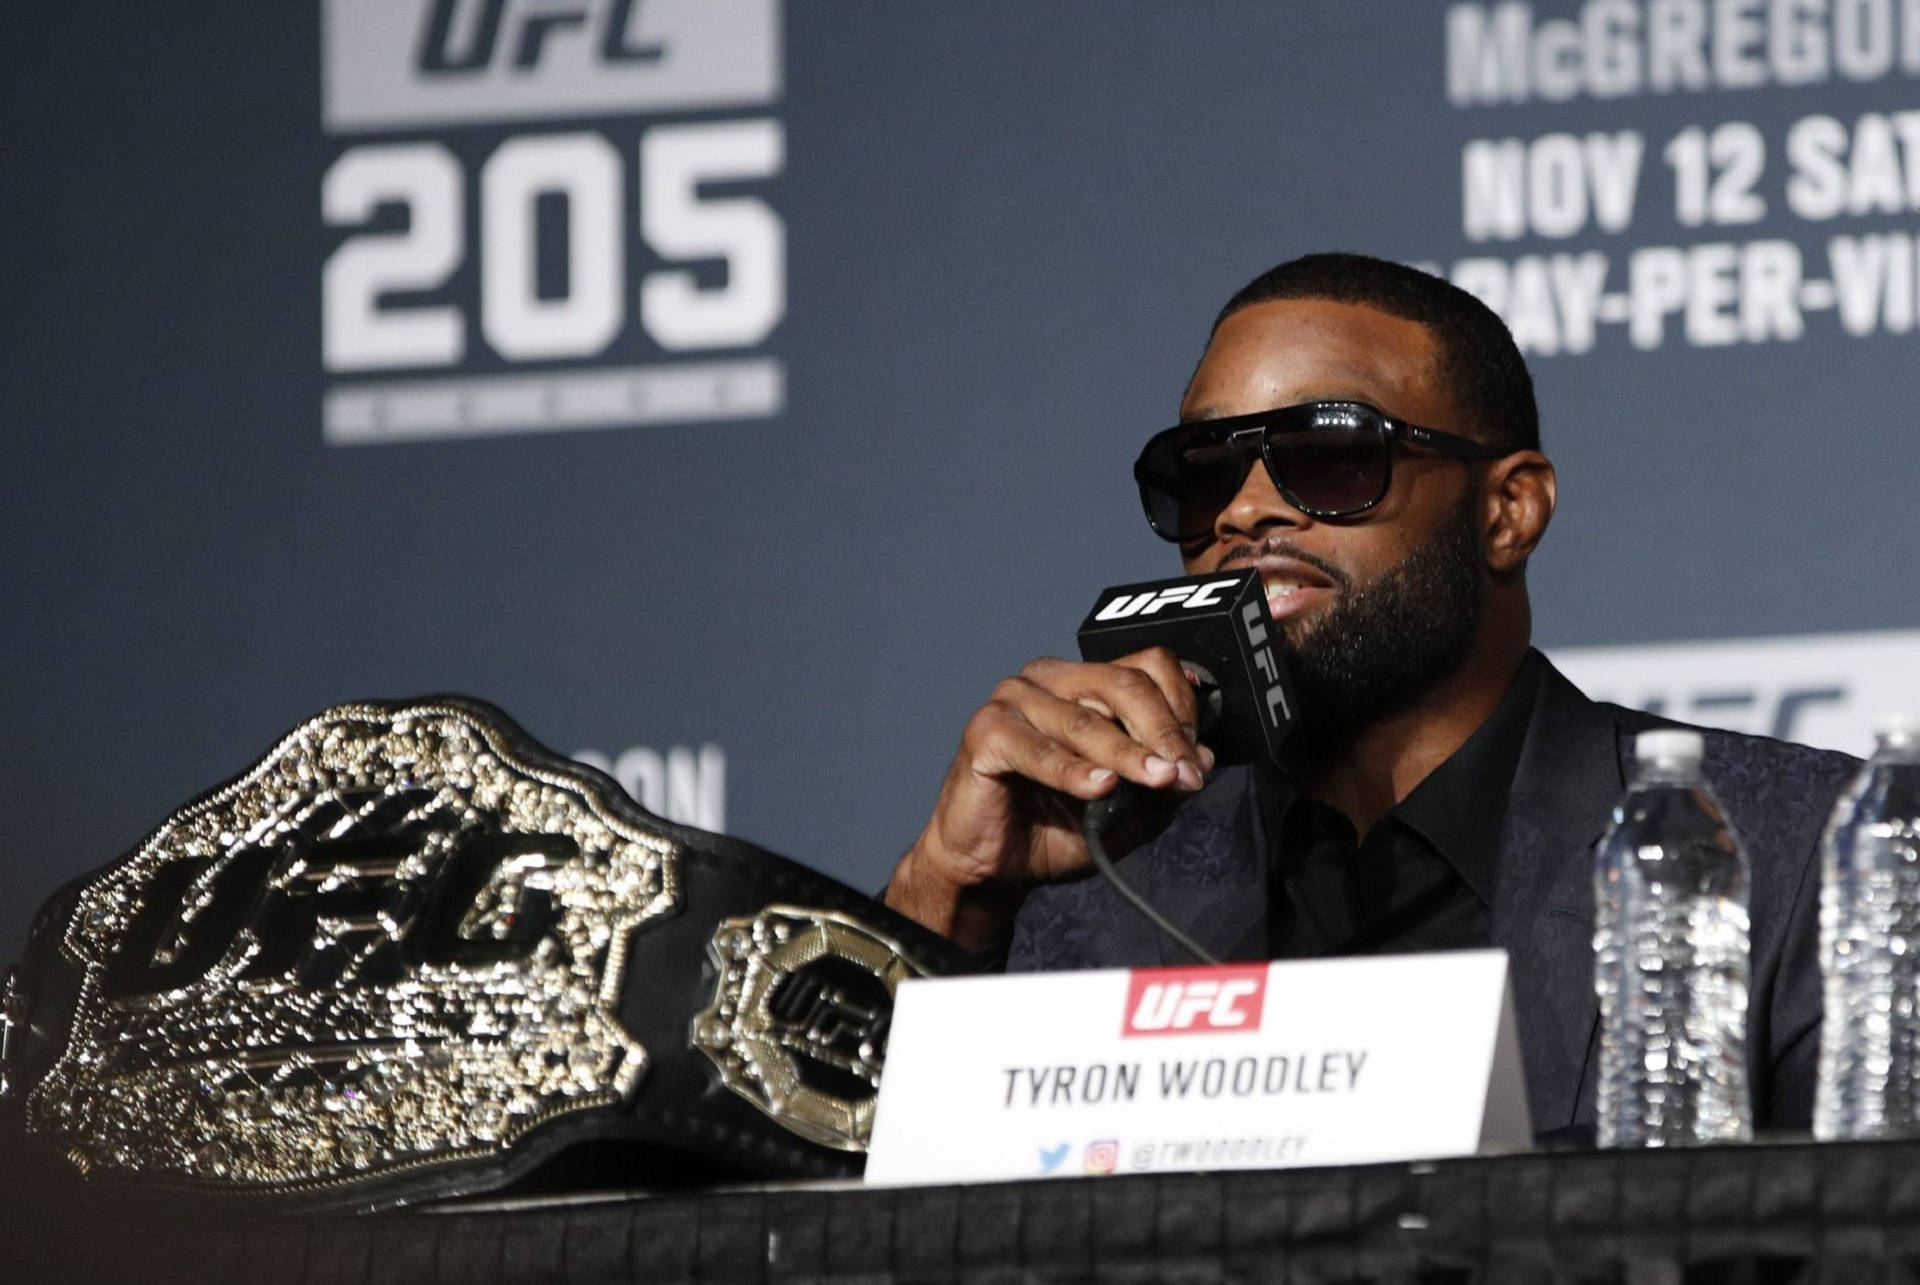 Tyron Woodley Welterweight Champion Background